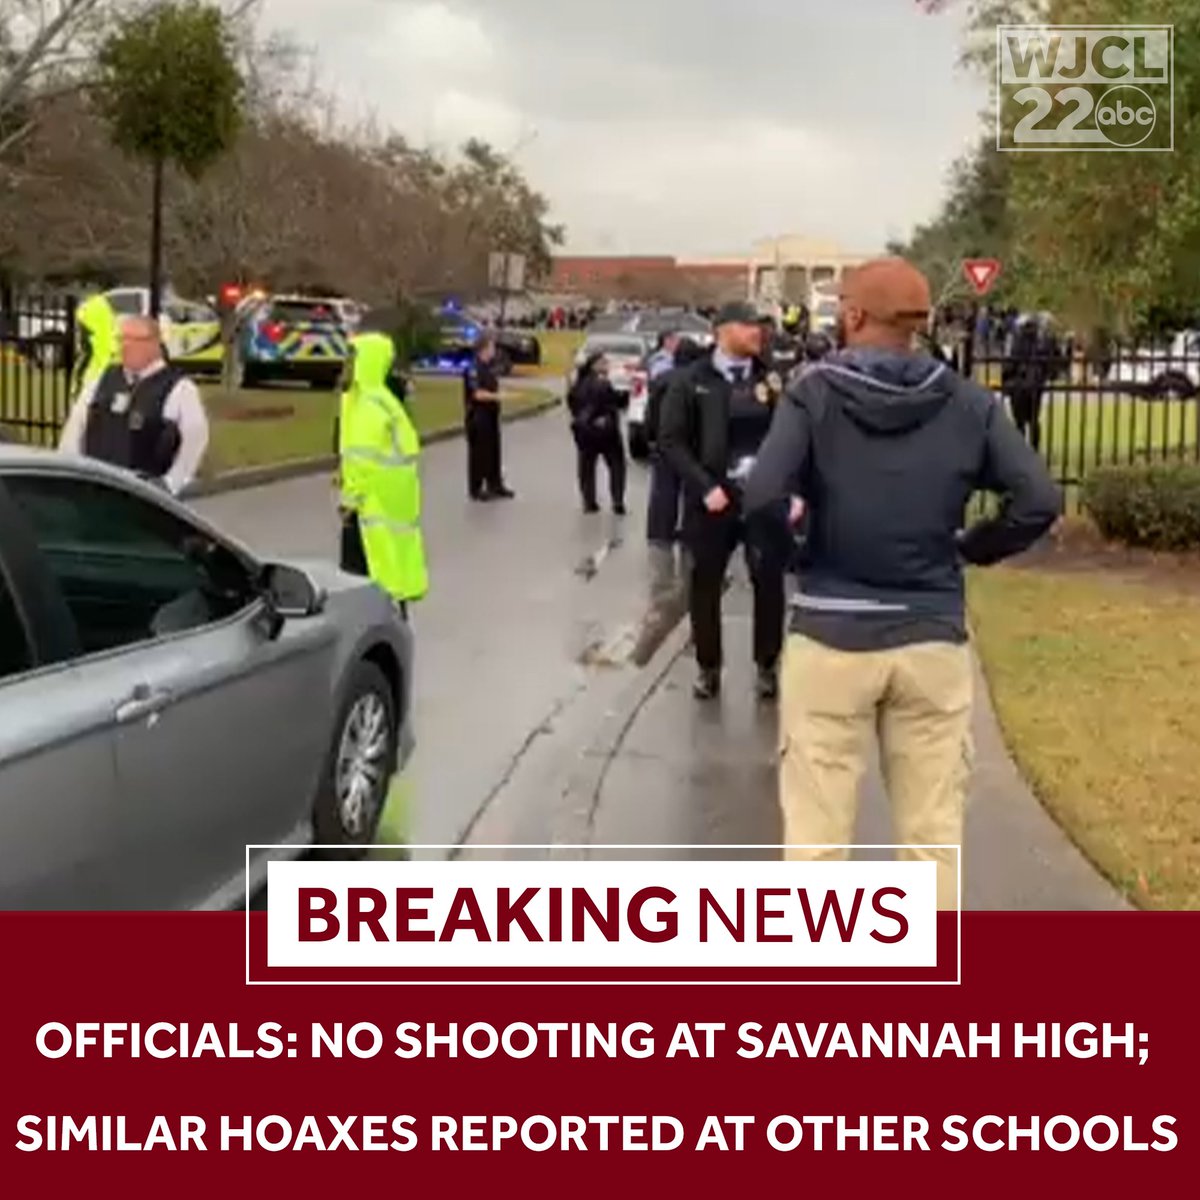 No injuries have been reported at Savannah High and police say there was no shooting at the campus